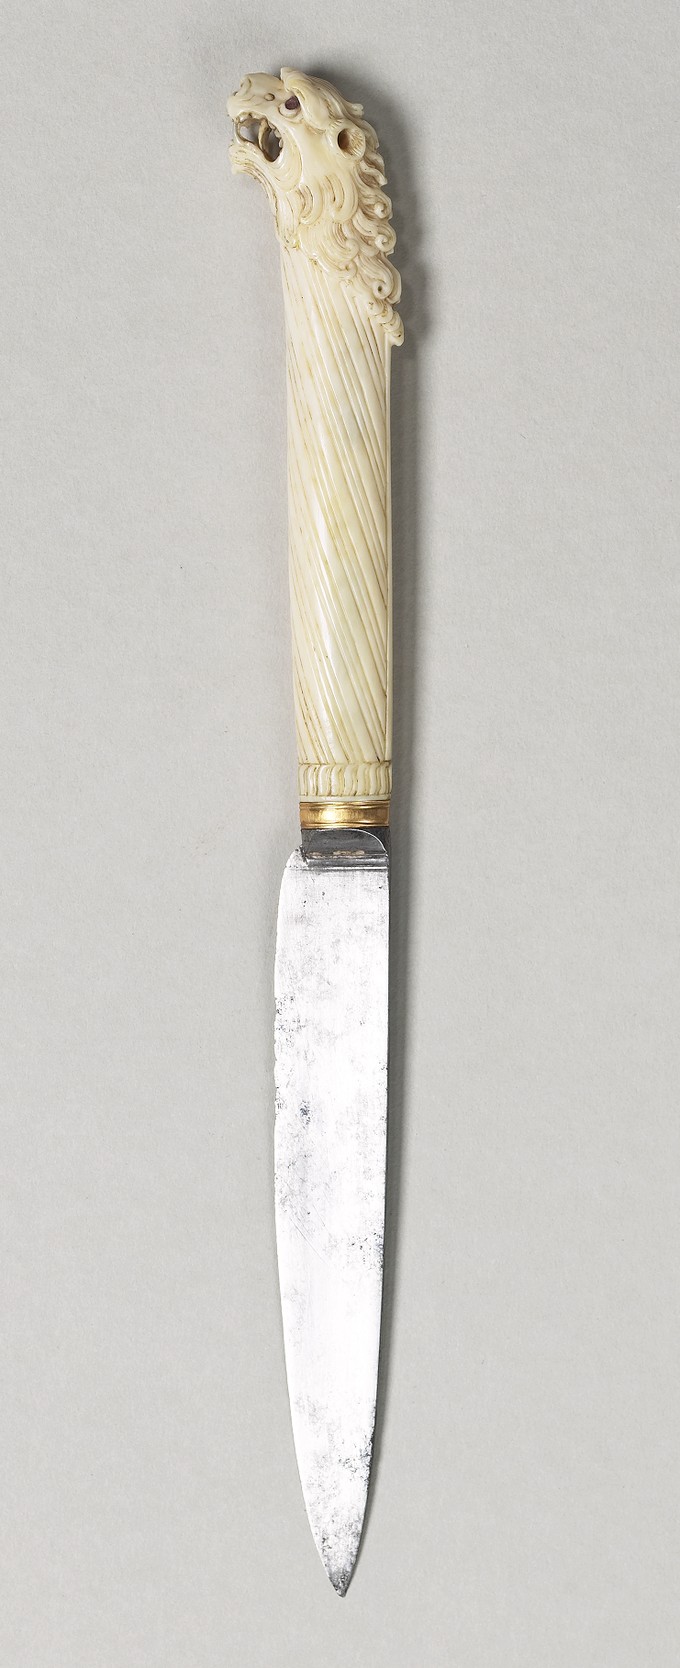 Knife with Handle in the Form of a Lion's Head